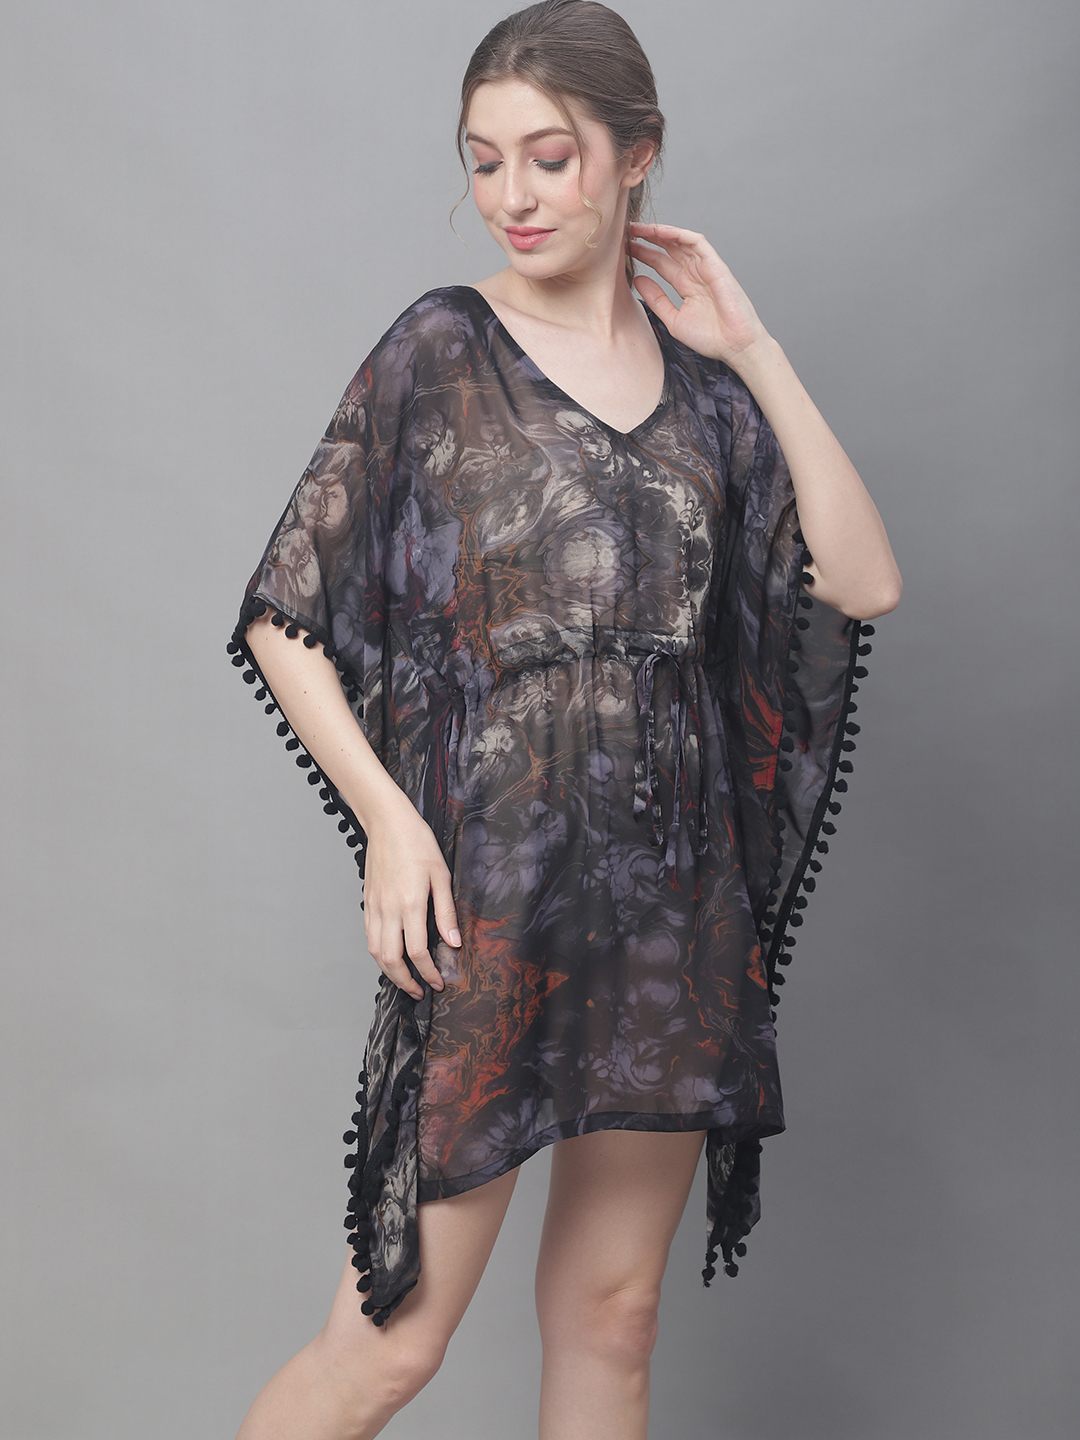 Black Color Abstract Printed Georgette Coverup  Beachwear Kaftan For Woman Claura Designs Pvt. Ltd. Kaftan black color, Coverup, georgette, kaftan, kaftan_freesize, Printed, Swimwear, V.Neck